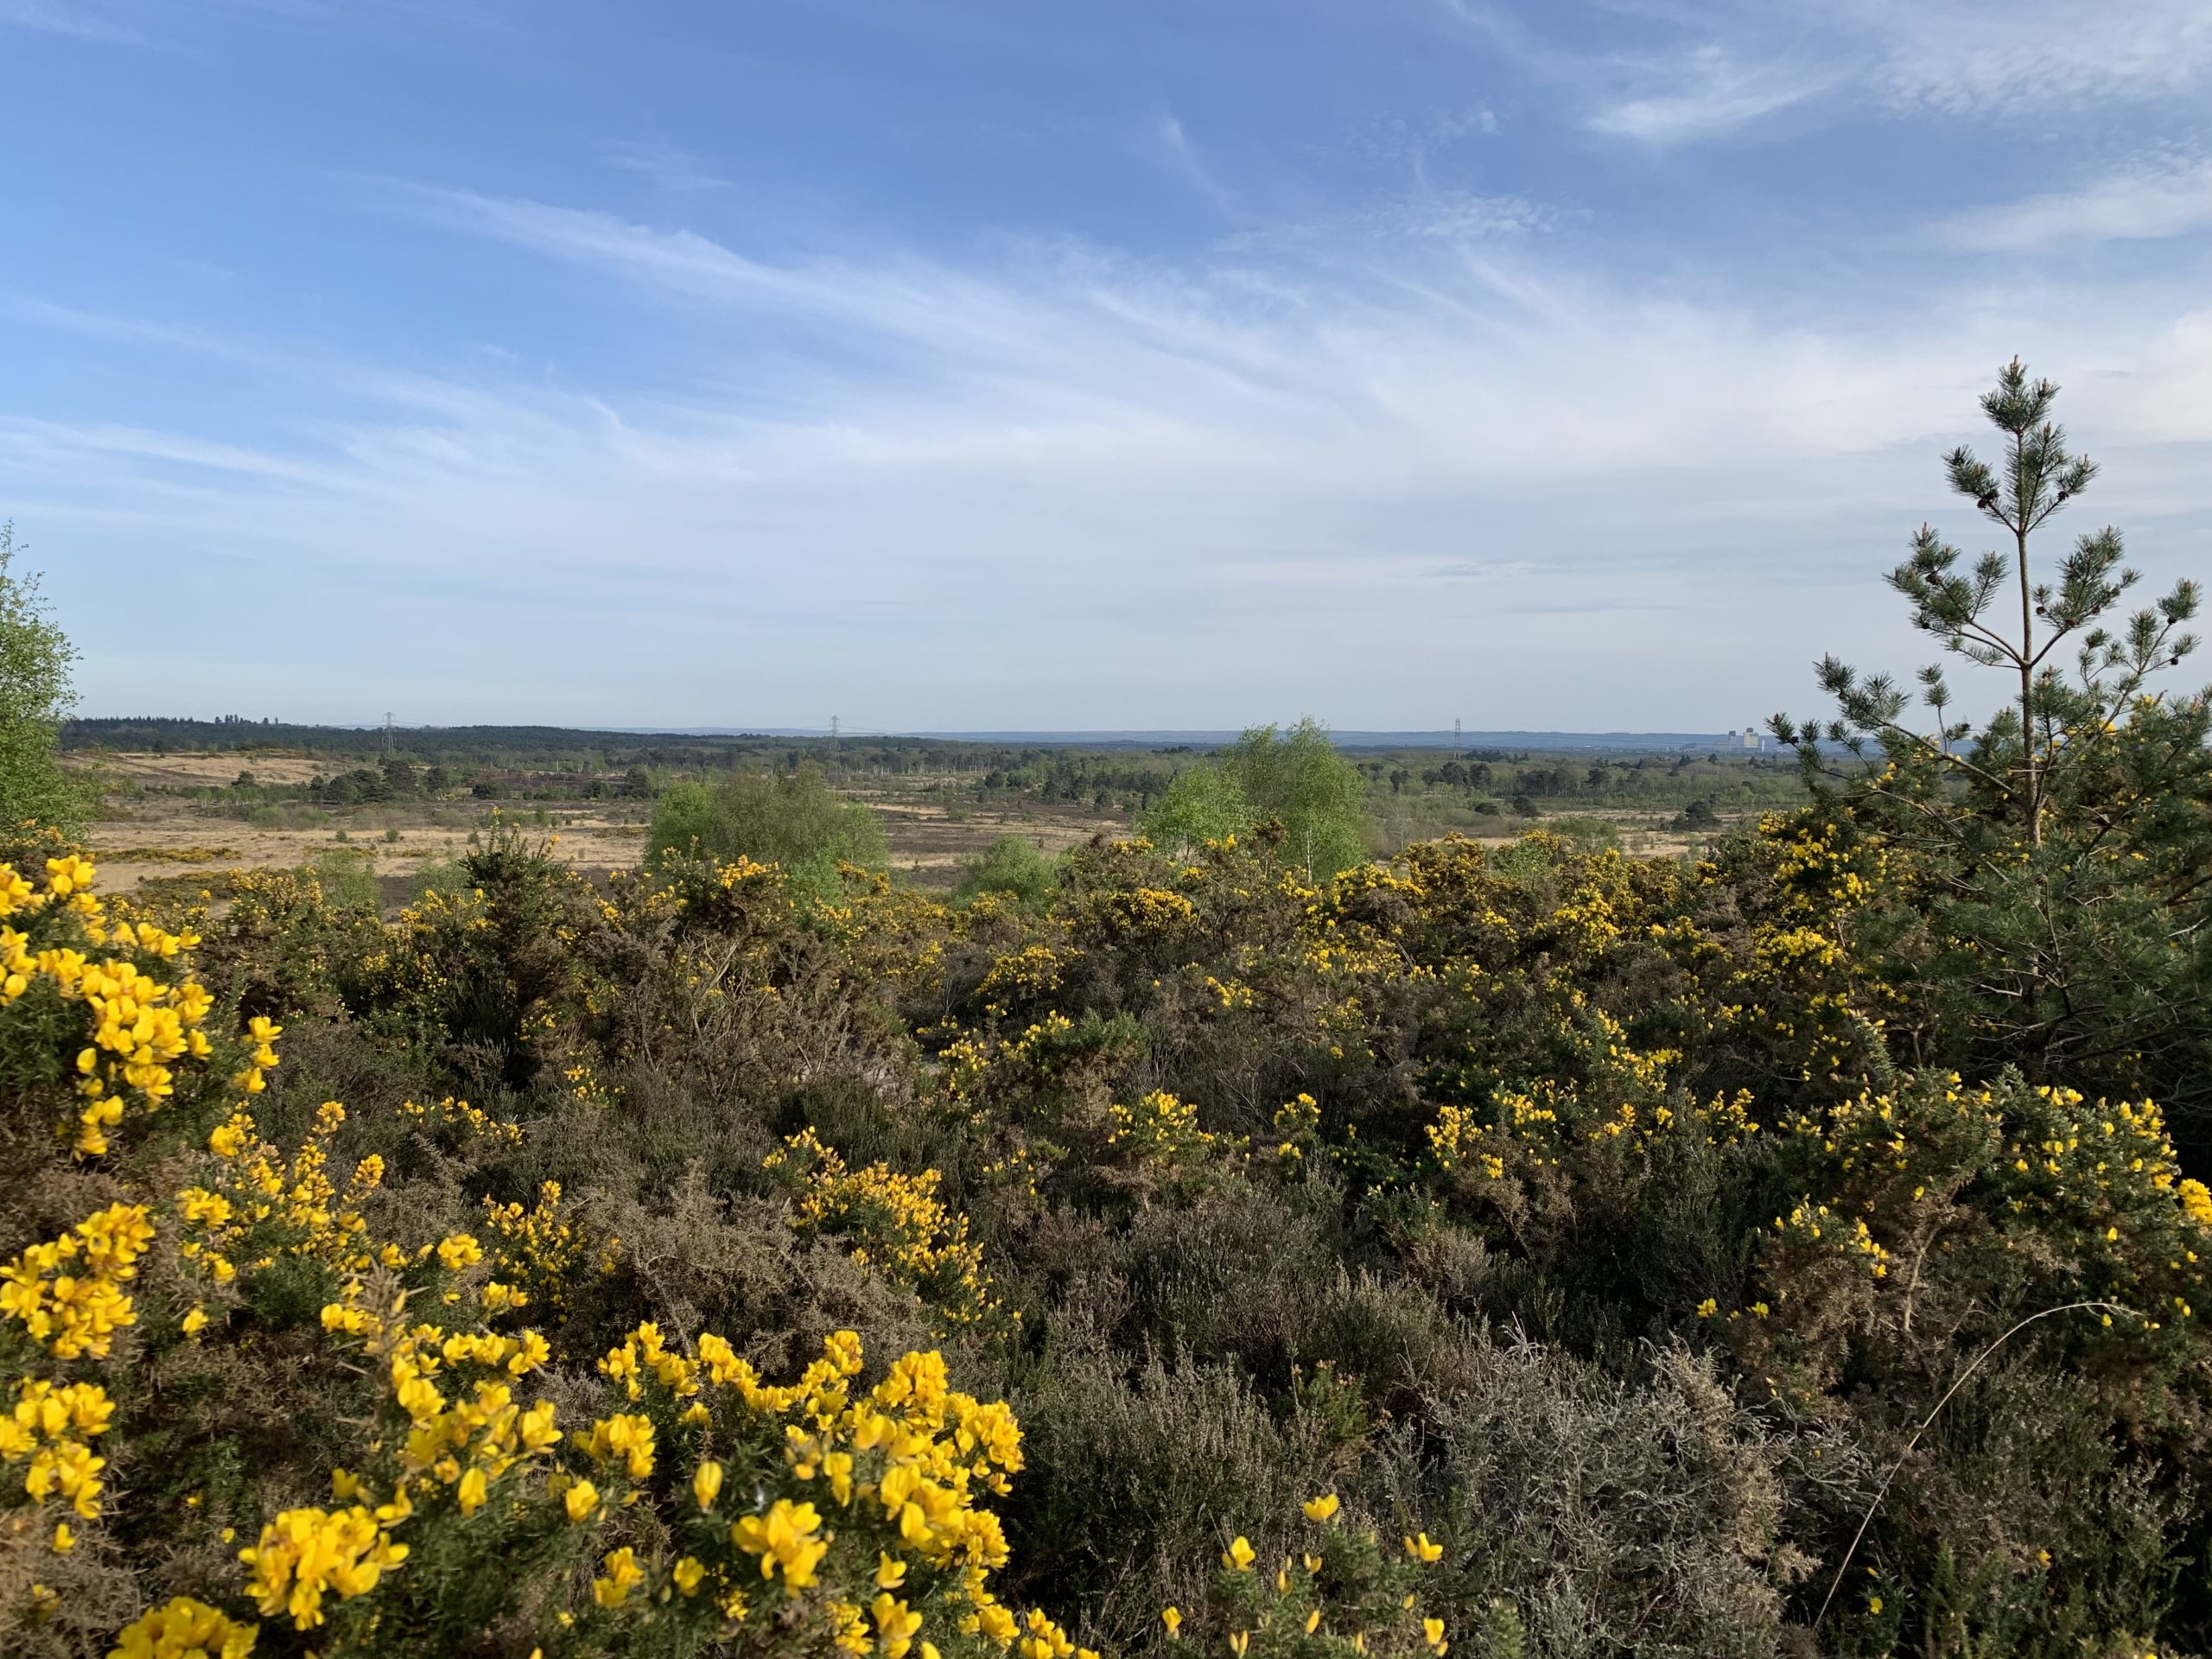 Far reaching view across an open landscape, with gorse and scrub in the foreground